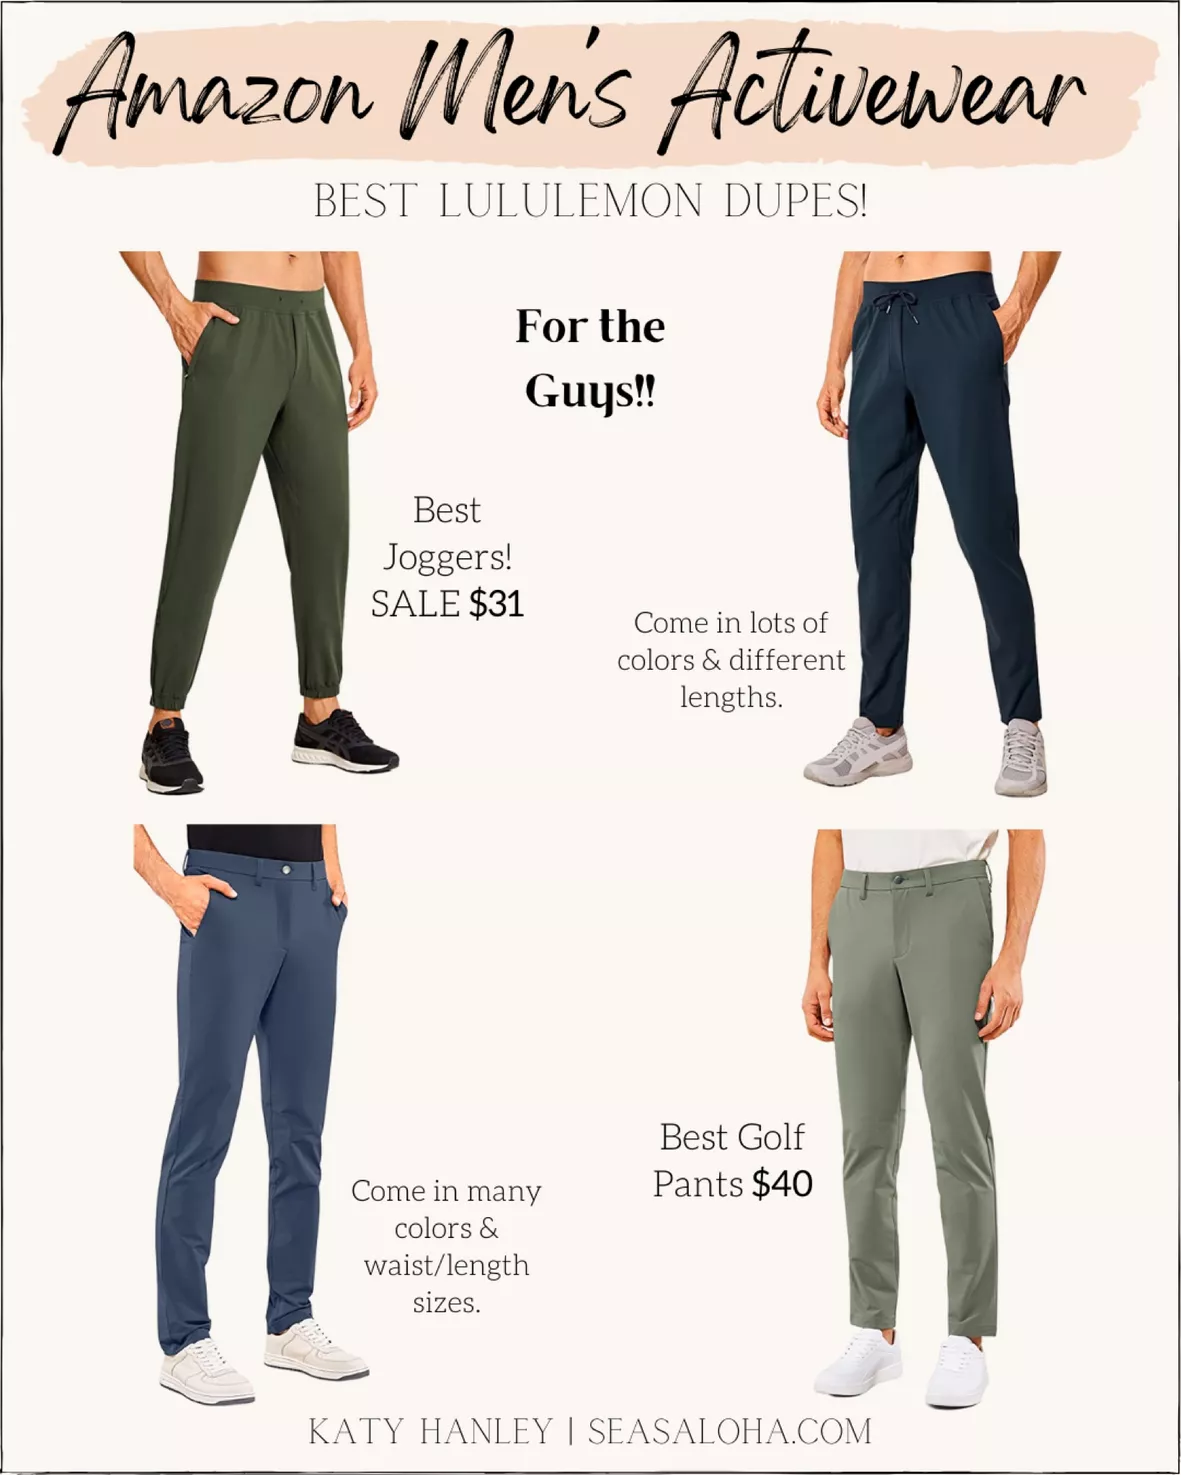 This is one of my favorite Lululemon dupes I have found on